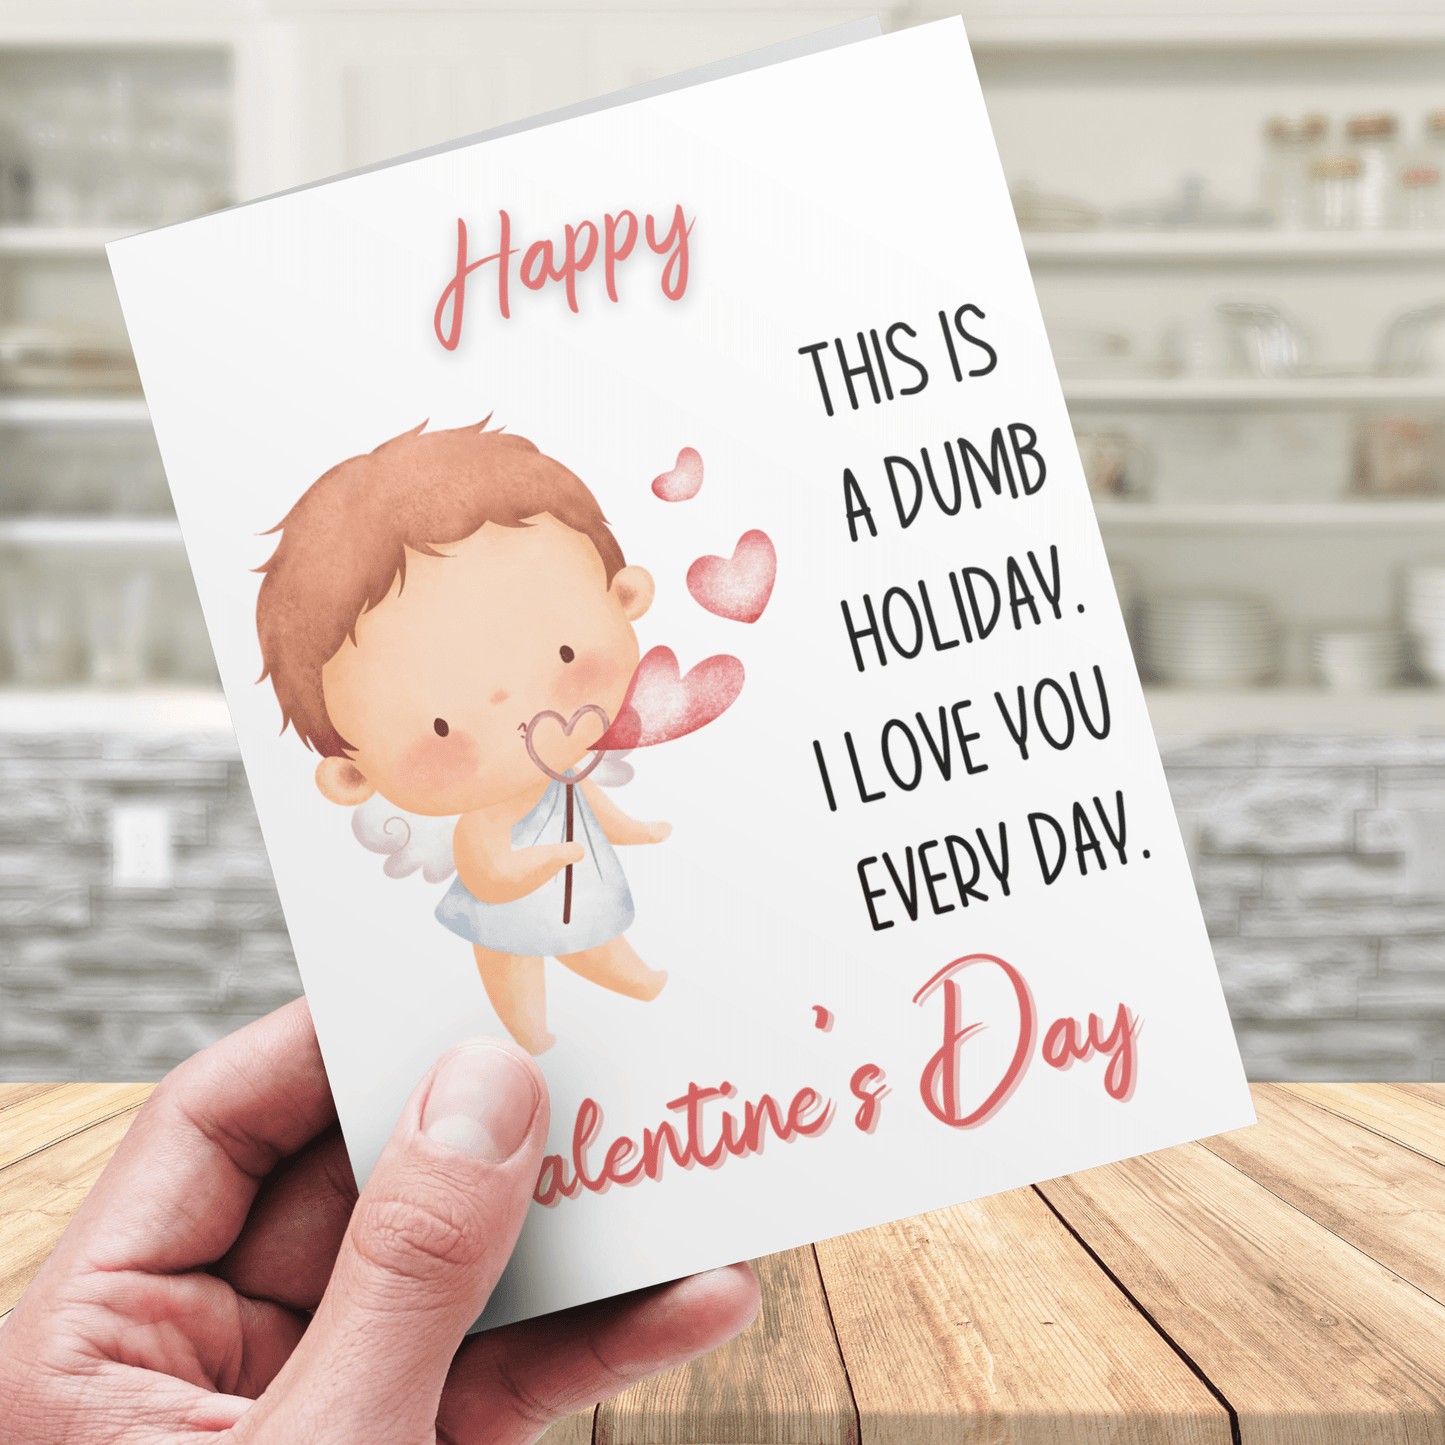 Valentine's Day Greeting Card: This Is A Dumb Holiday...